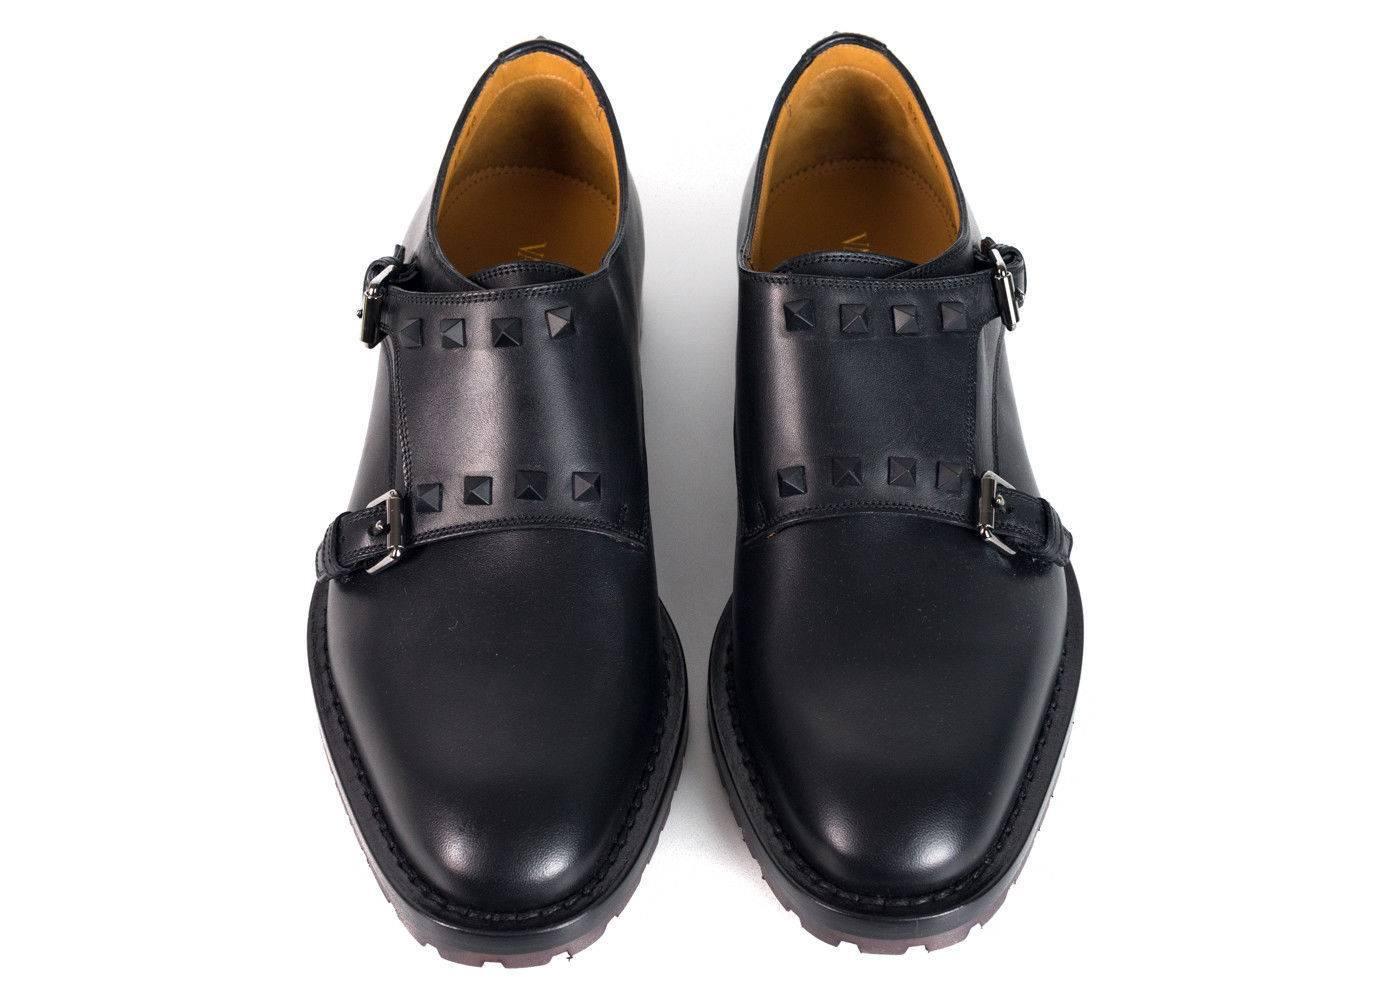 Take your style to the next level with this pair of Valentino Derby Oxfords. These shoes have been crafted from Italian leather in a black with monochromatic printed stars, that offers a semi-shiny smooth finish. Featuring a smooth stacked wooden